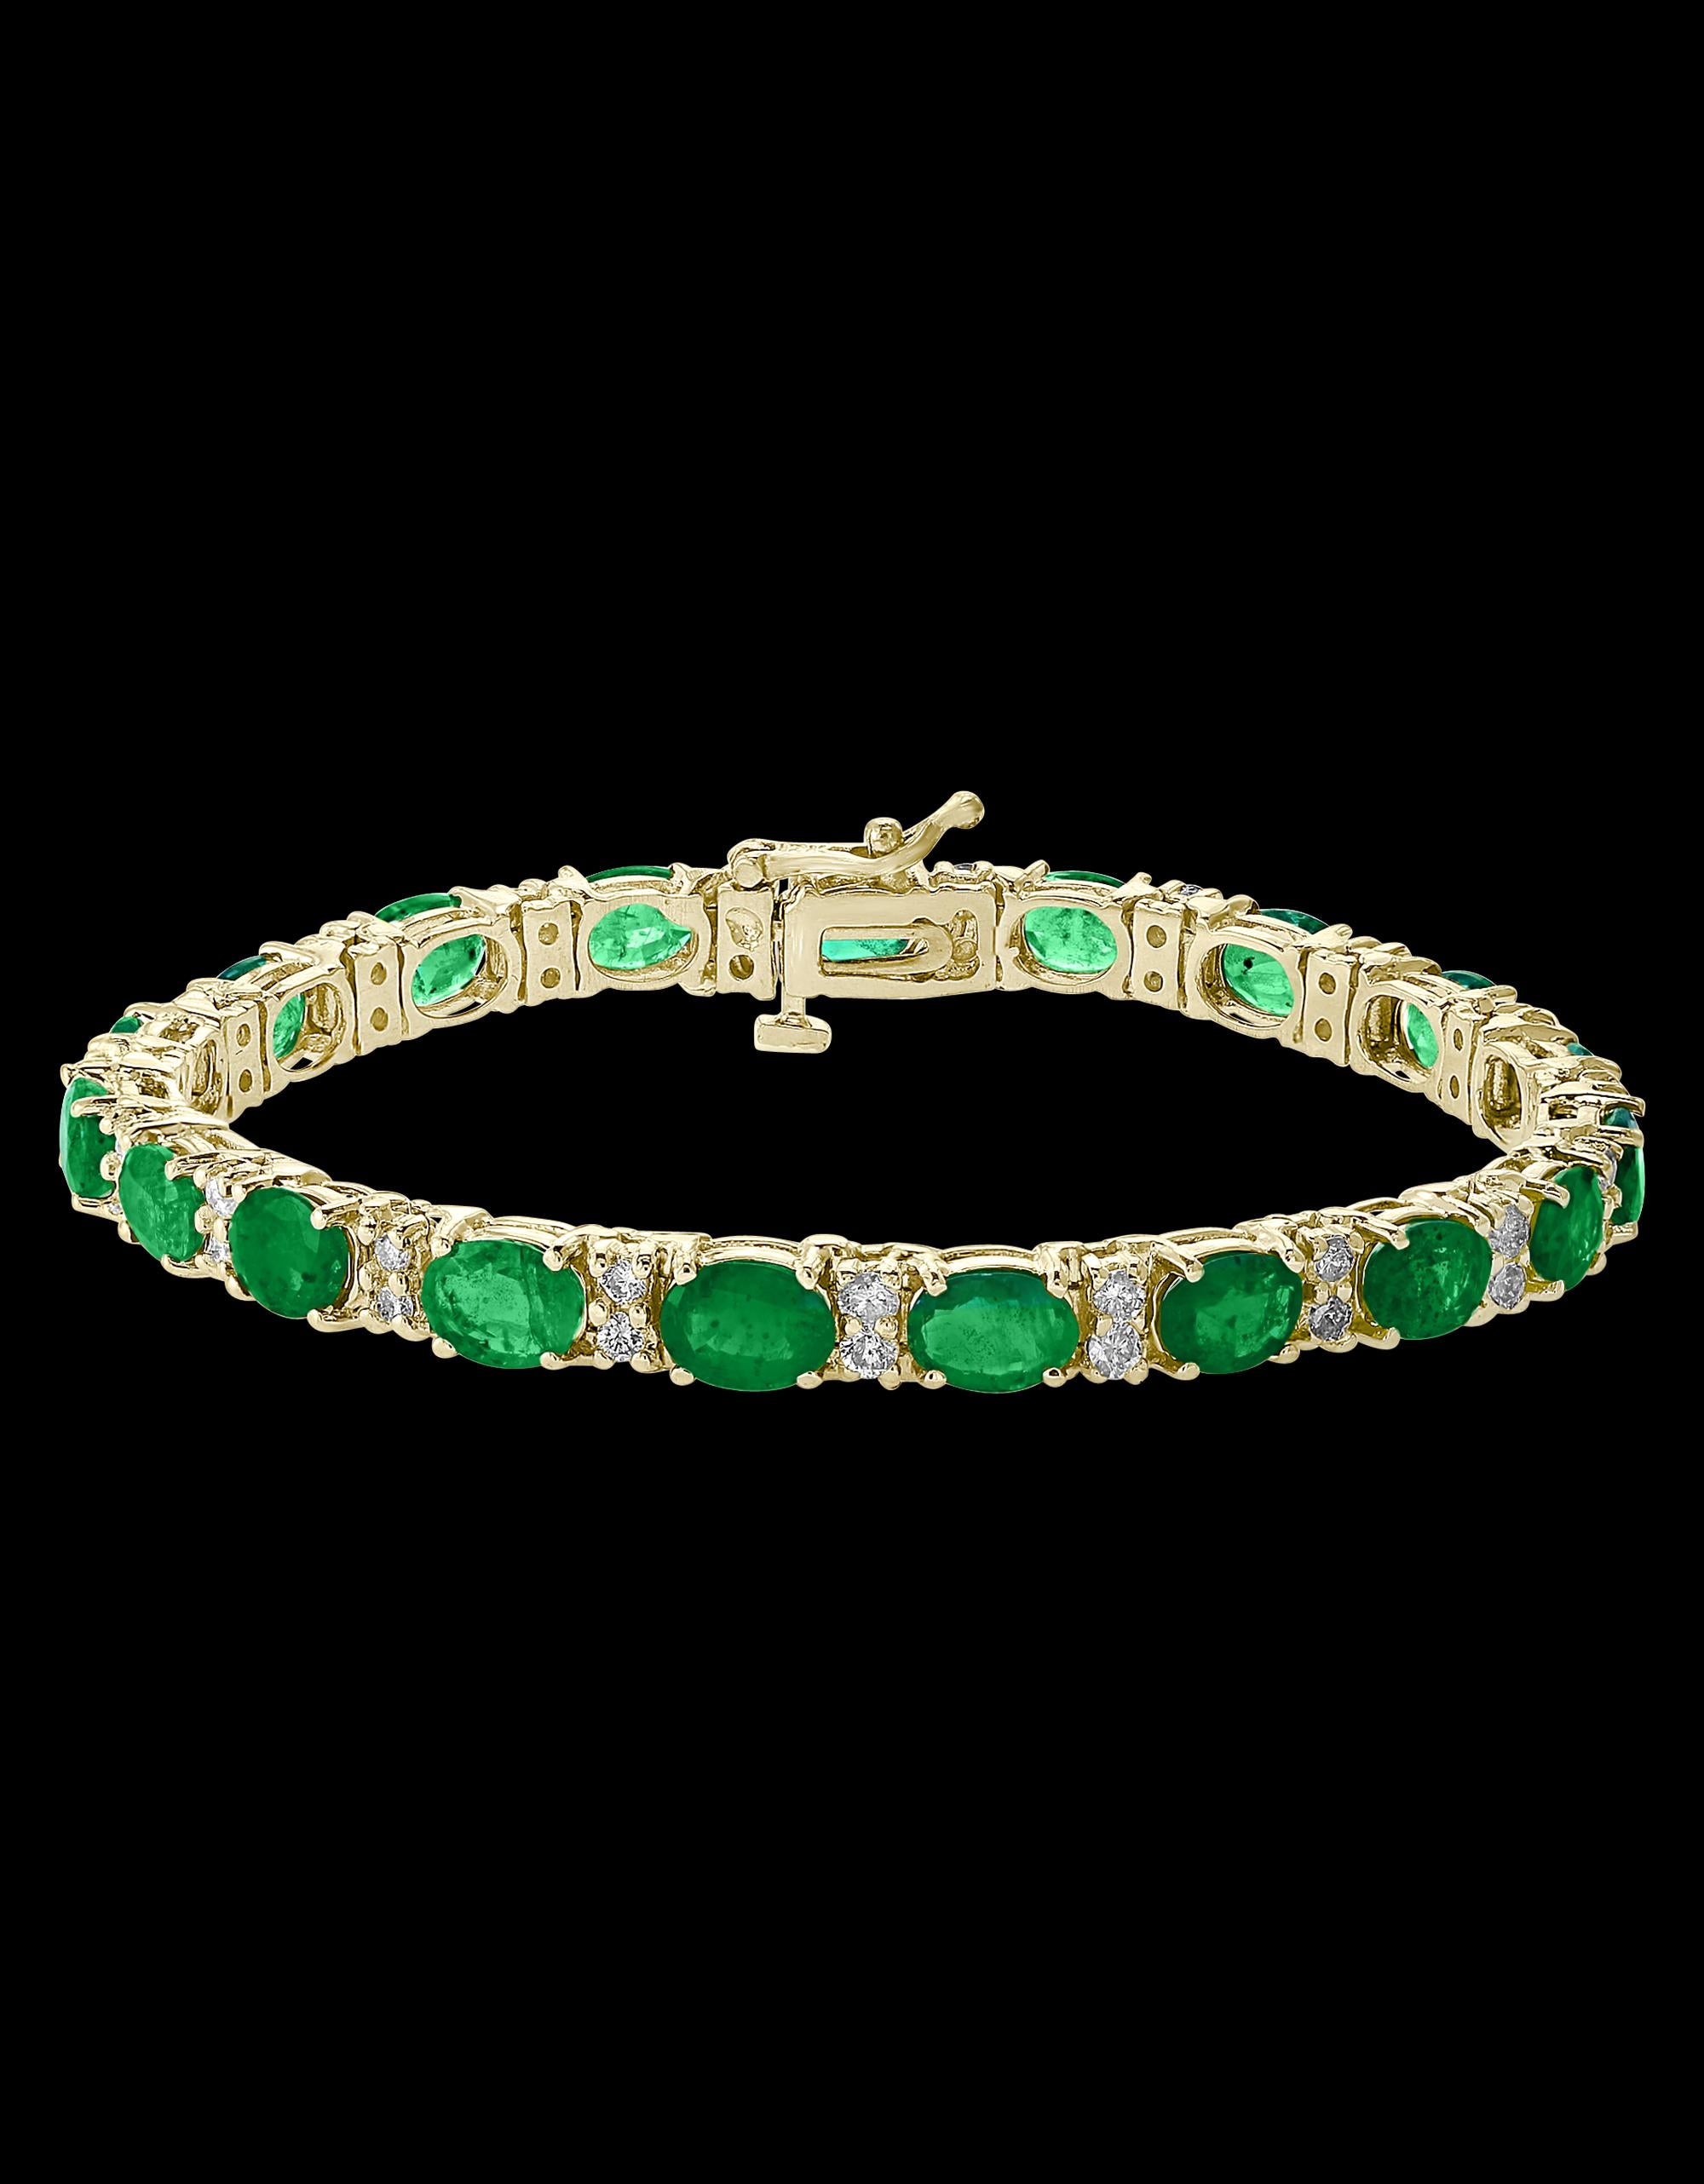  This exceptionally affordable Tennis  bracelet has  19 stones of oval  Emeralds  . Each Emerald is spaced by two diamonds . Total weight of the Emeralds is  approximately 15 carat. Total number of diamonds are 38 and diamond weighs is over 1.0